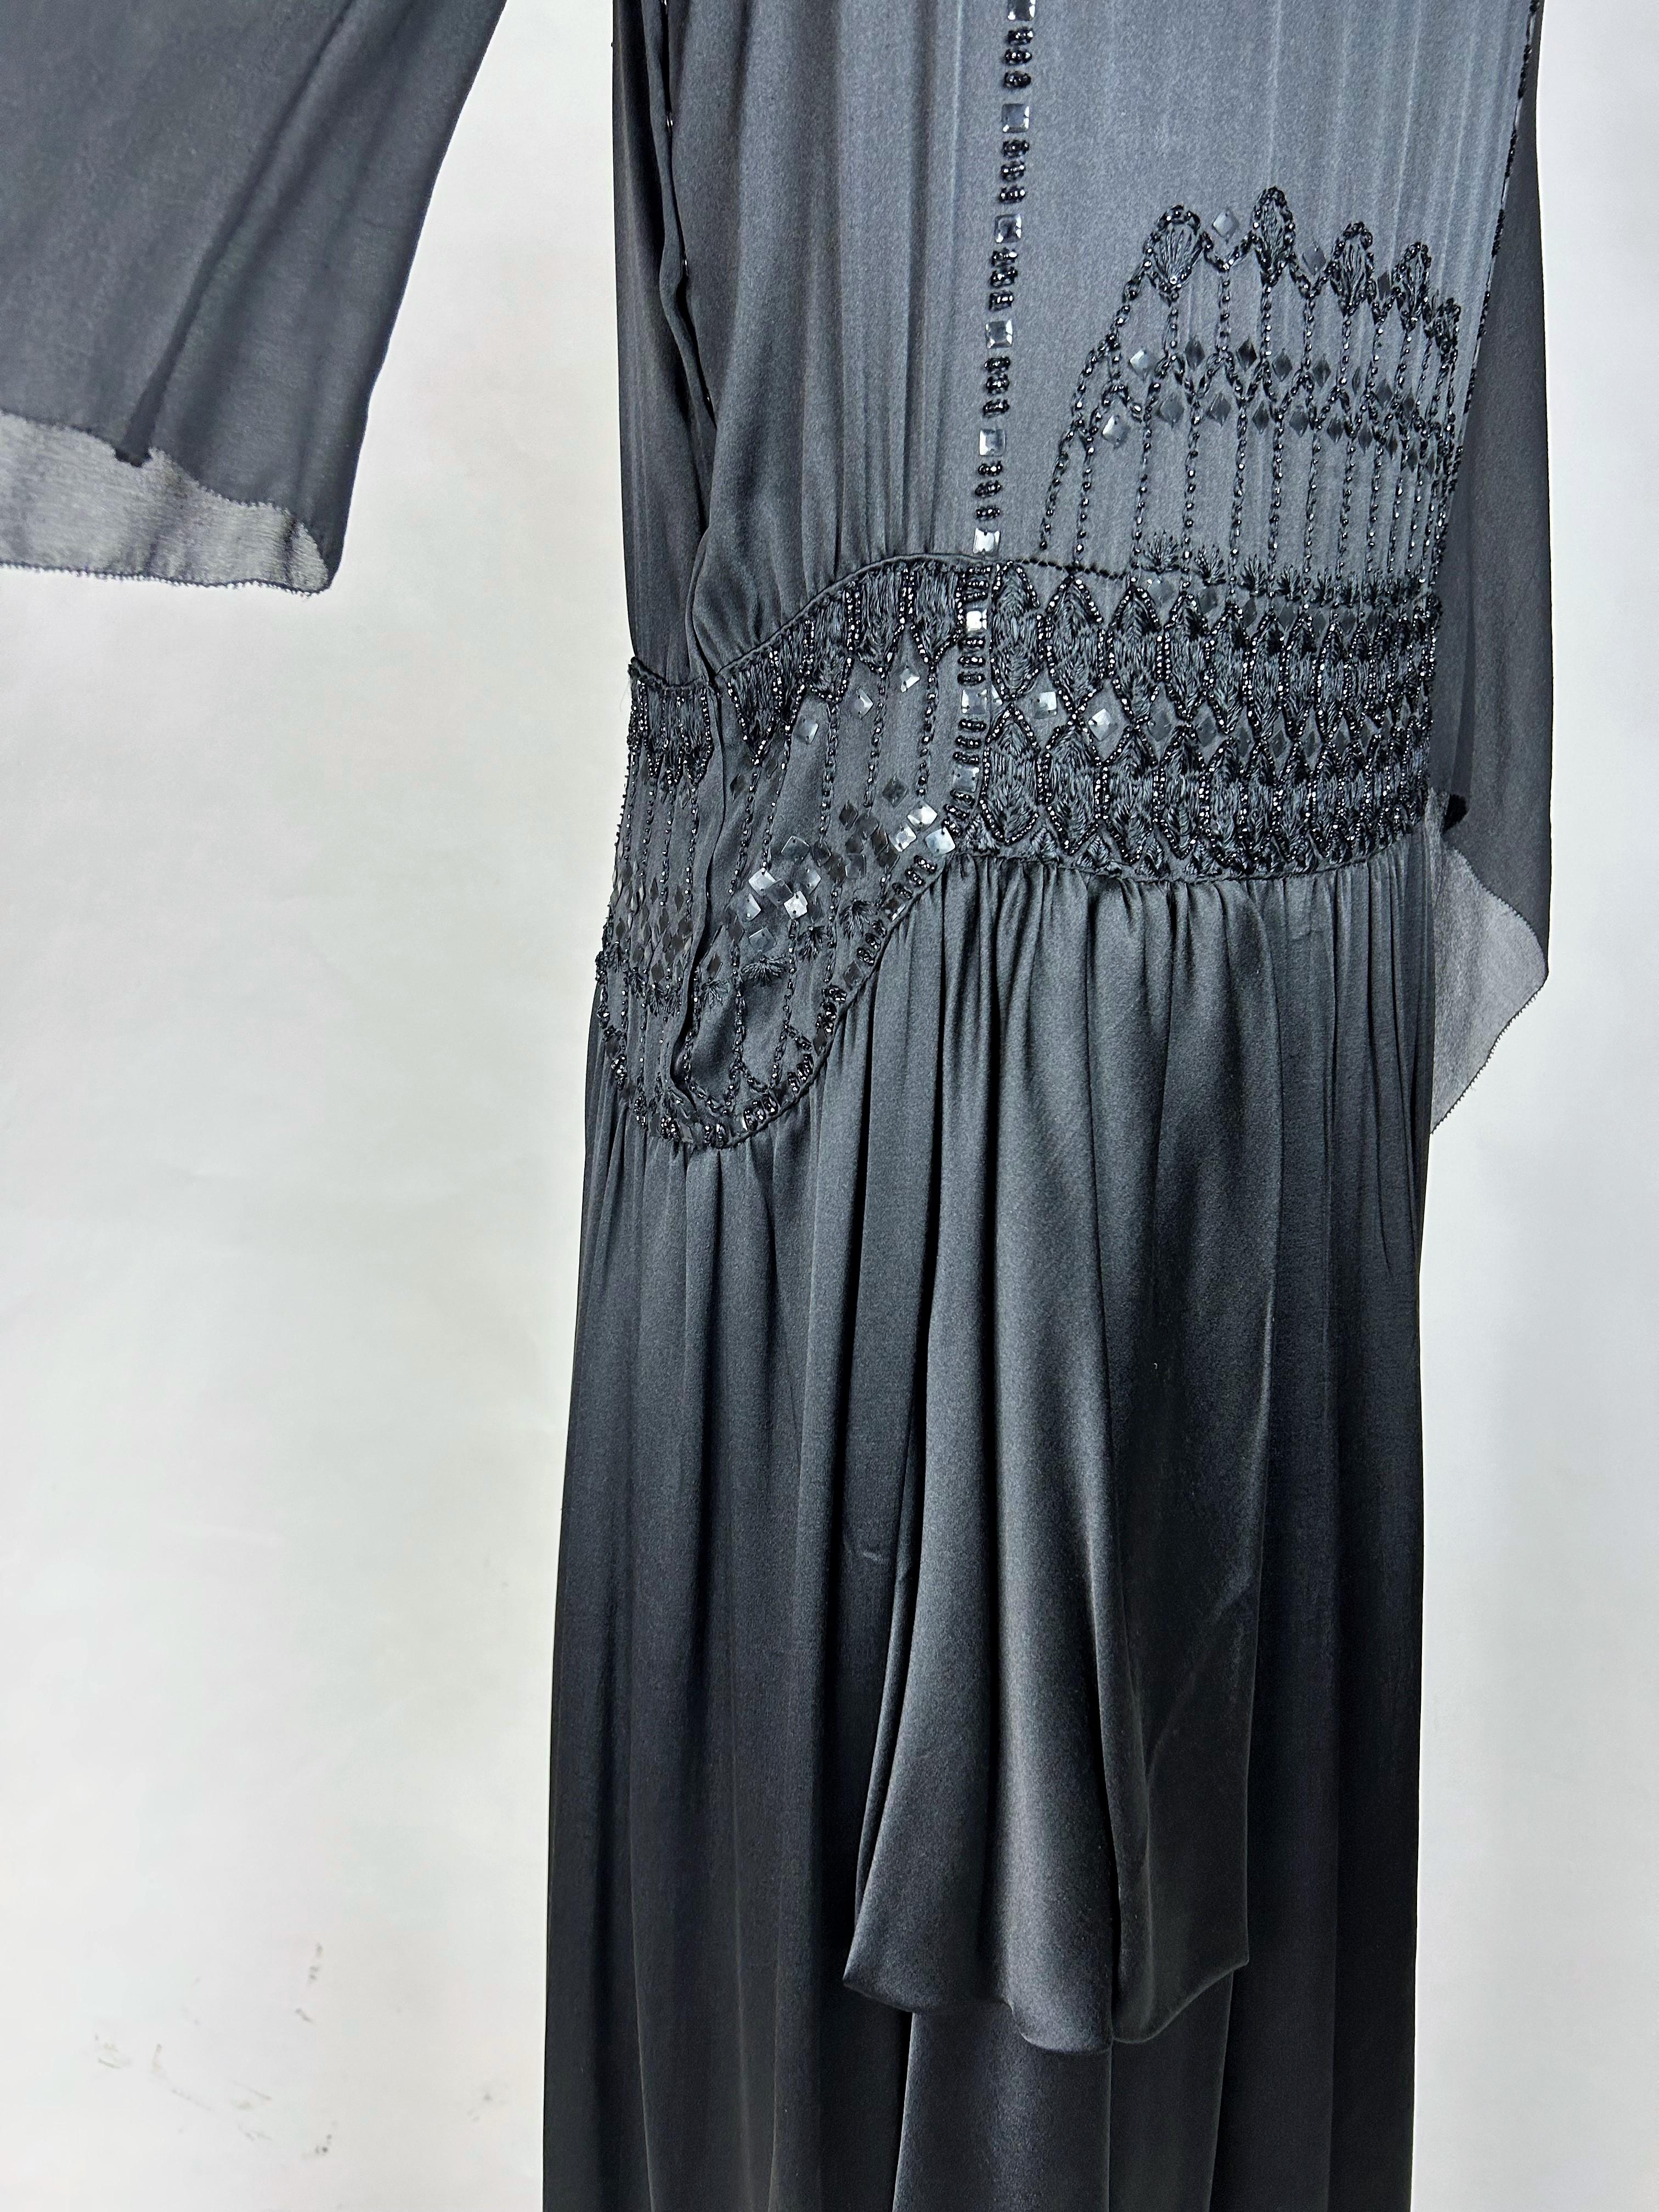 Long evening dress in embroidered satin and chiffon - Paris Circa 1920 For Sale 9